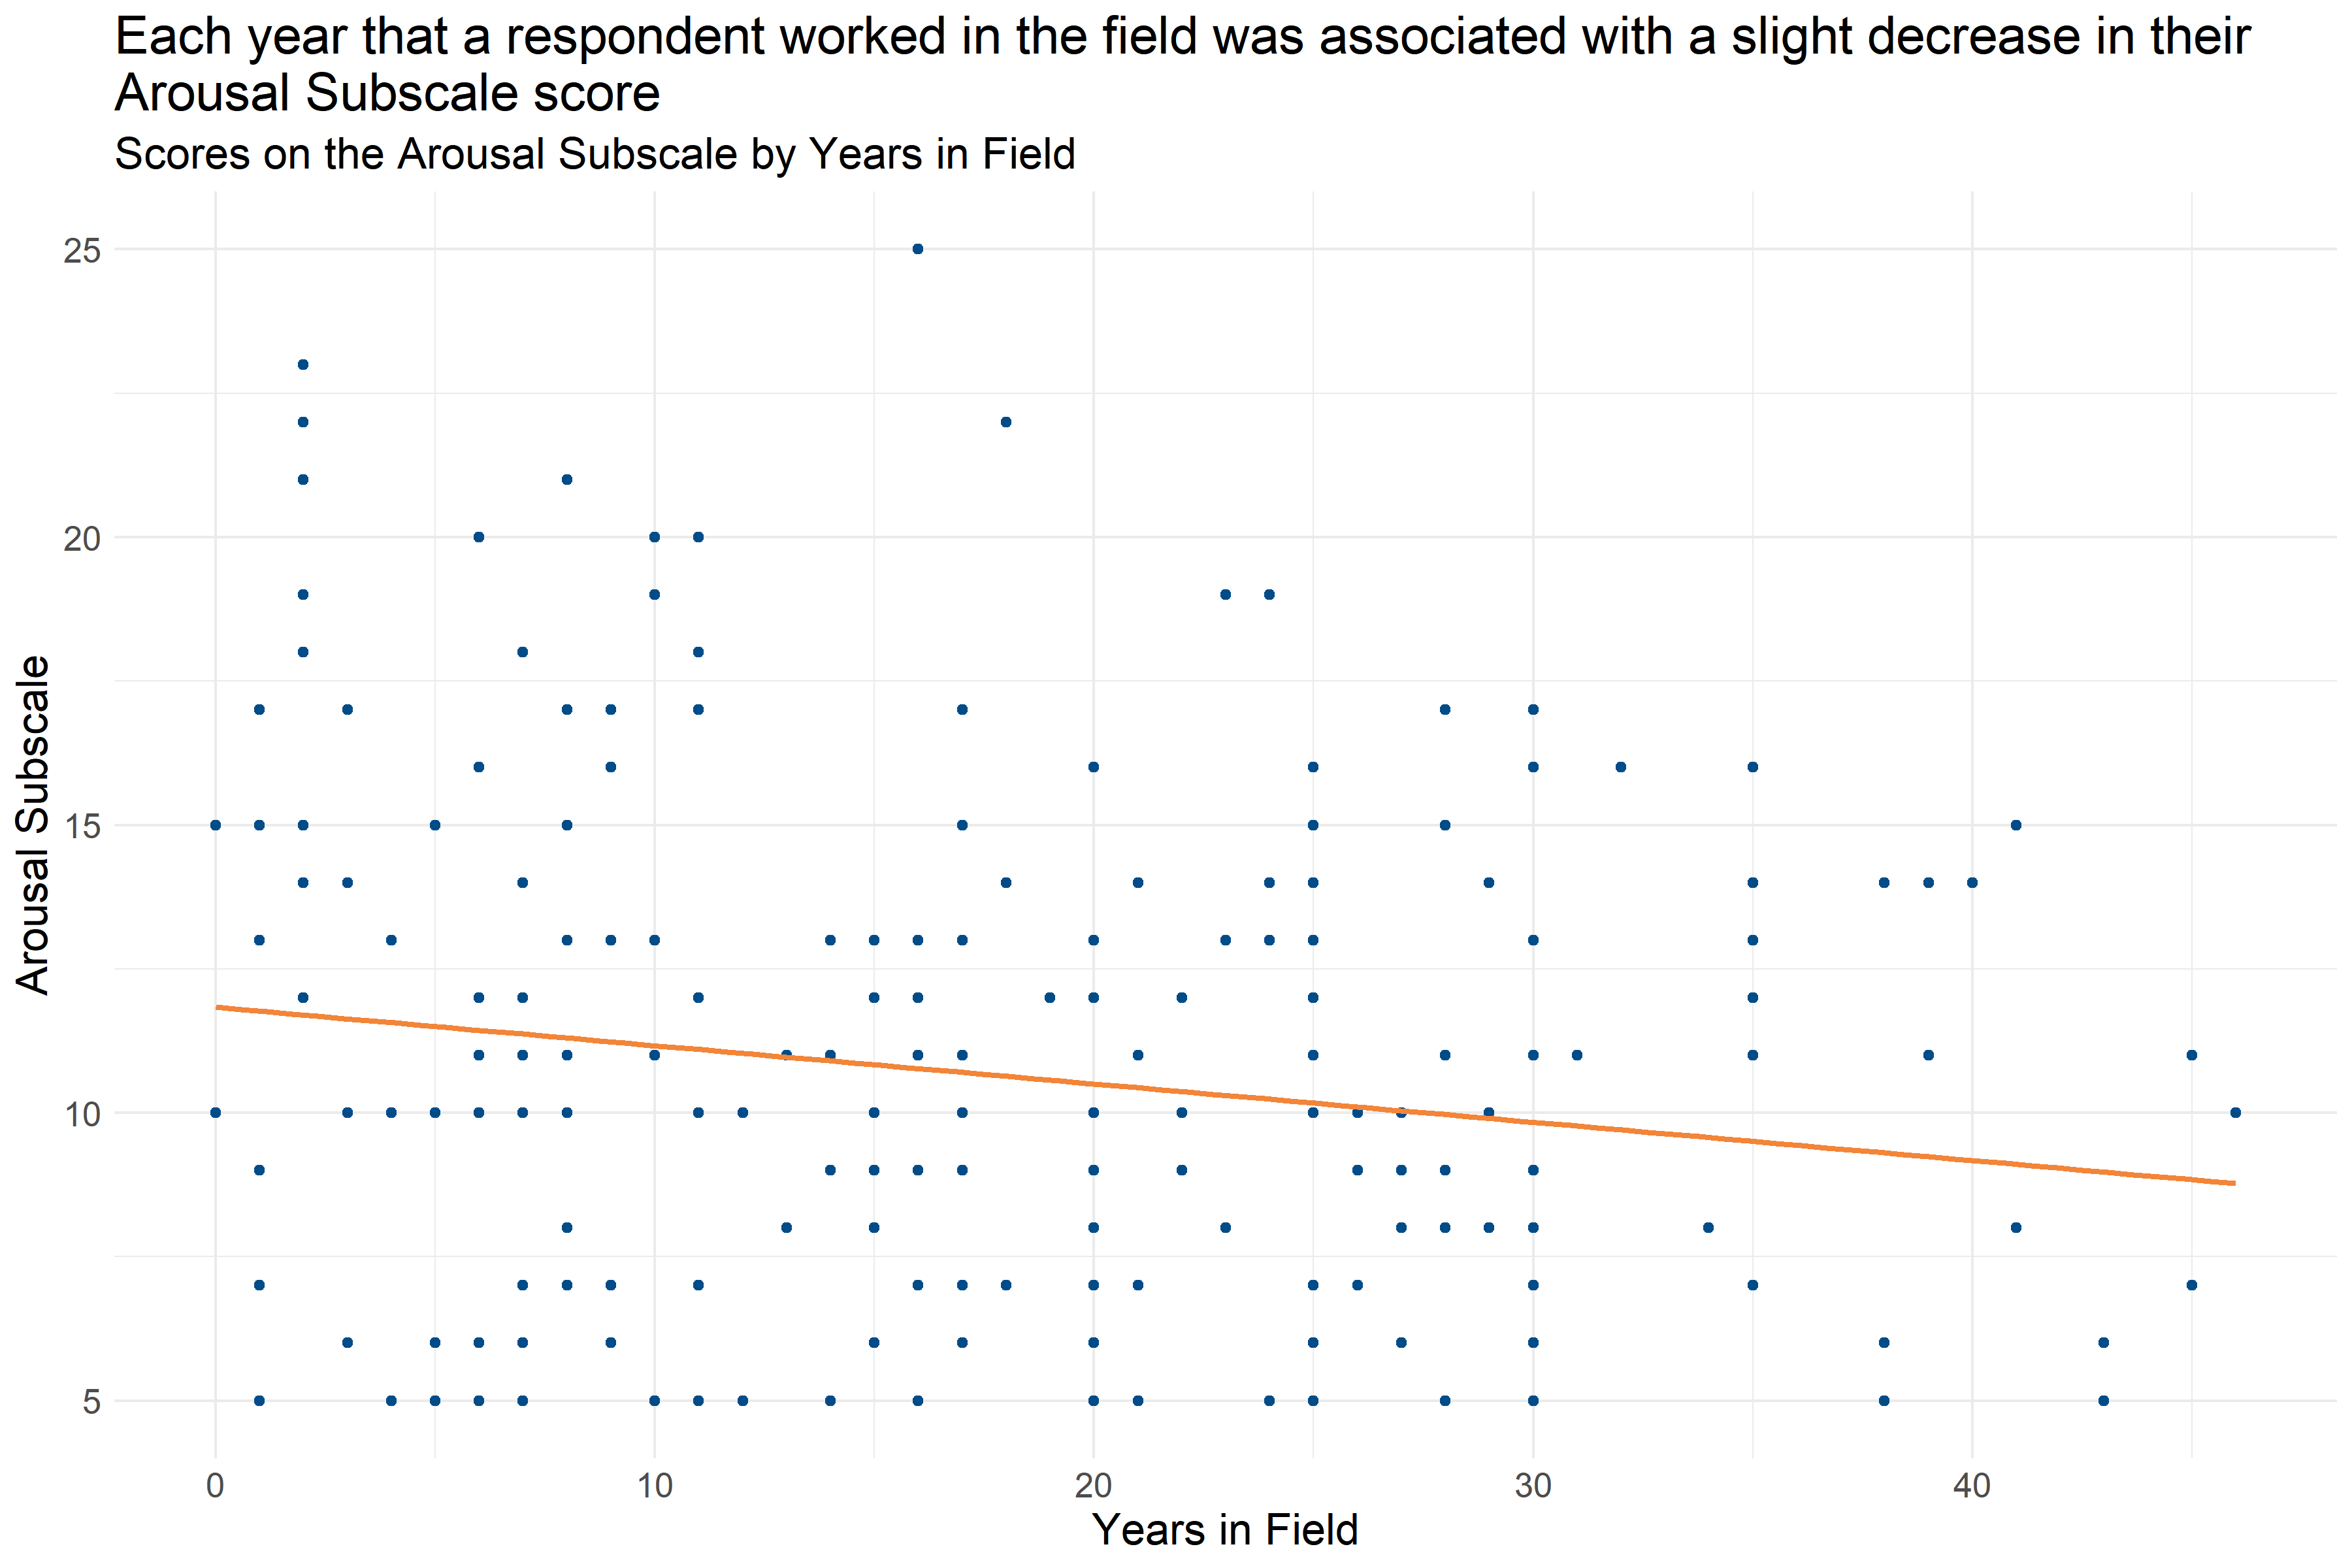 Scatter plot of Years in Field and Arousal Subscale Score